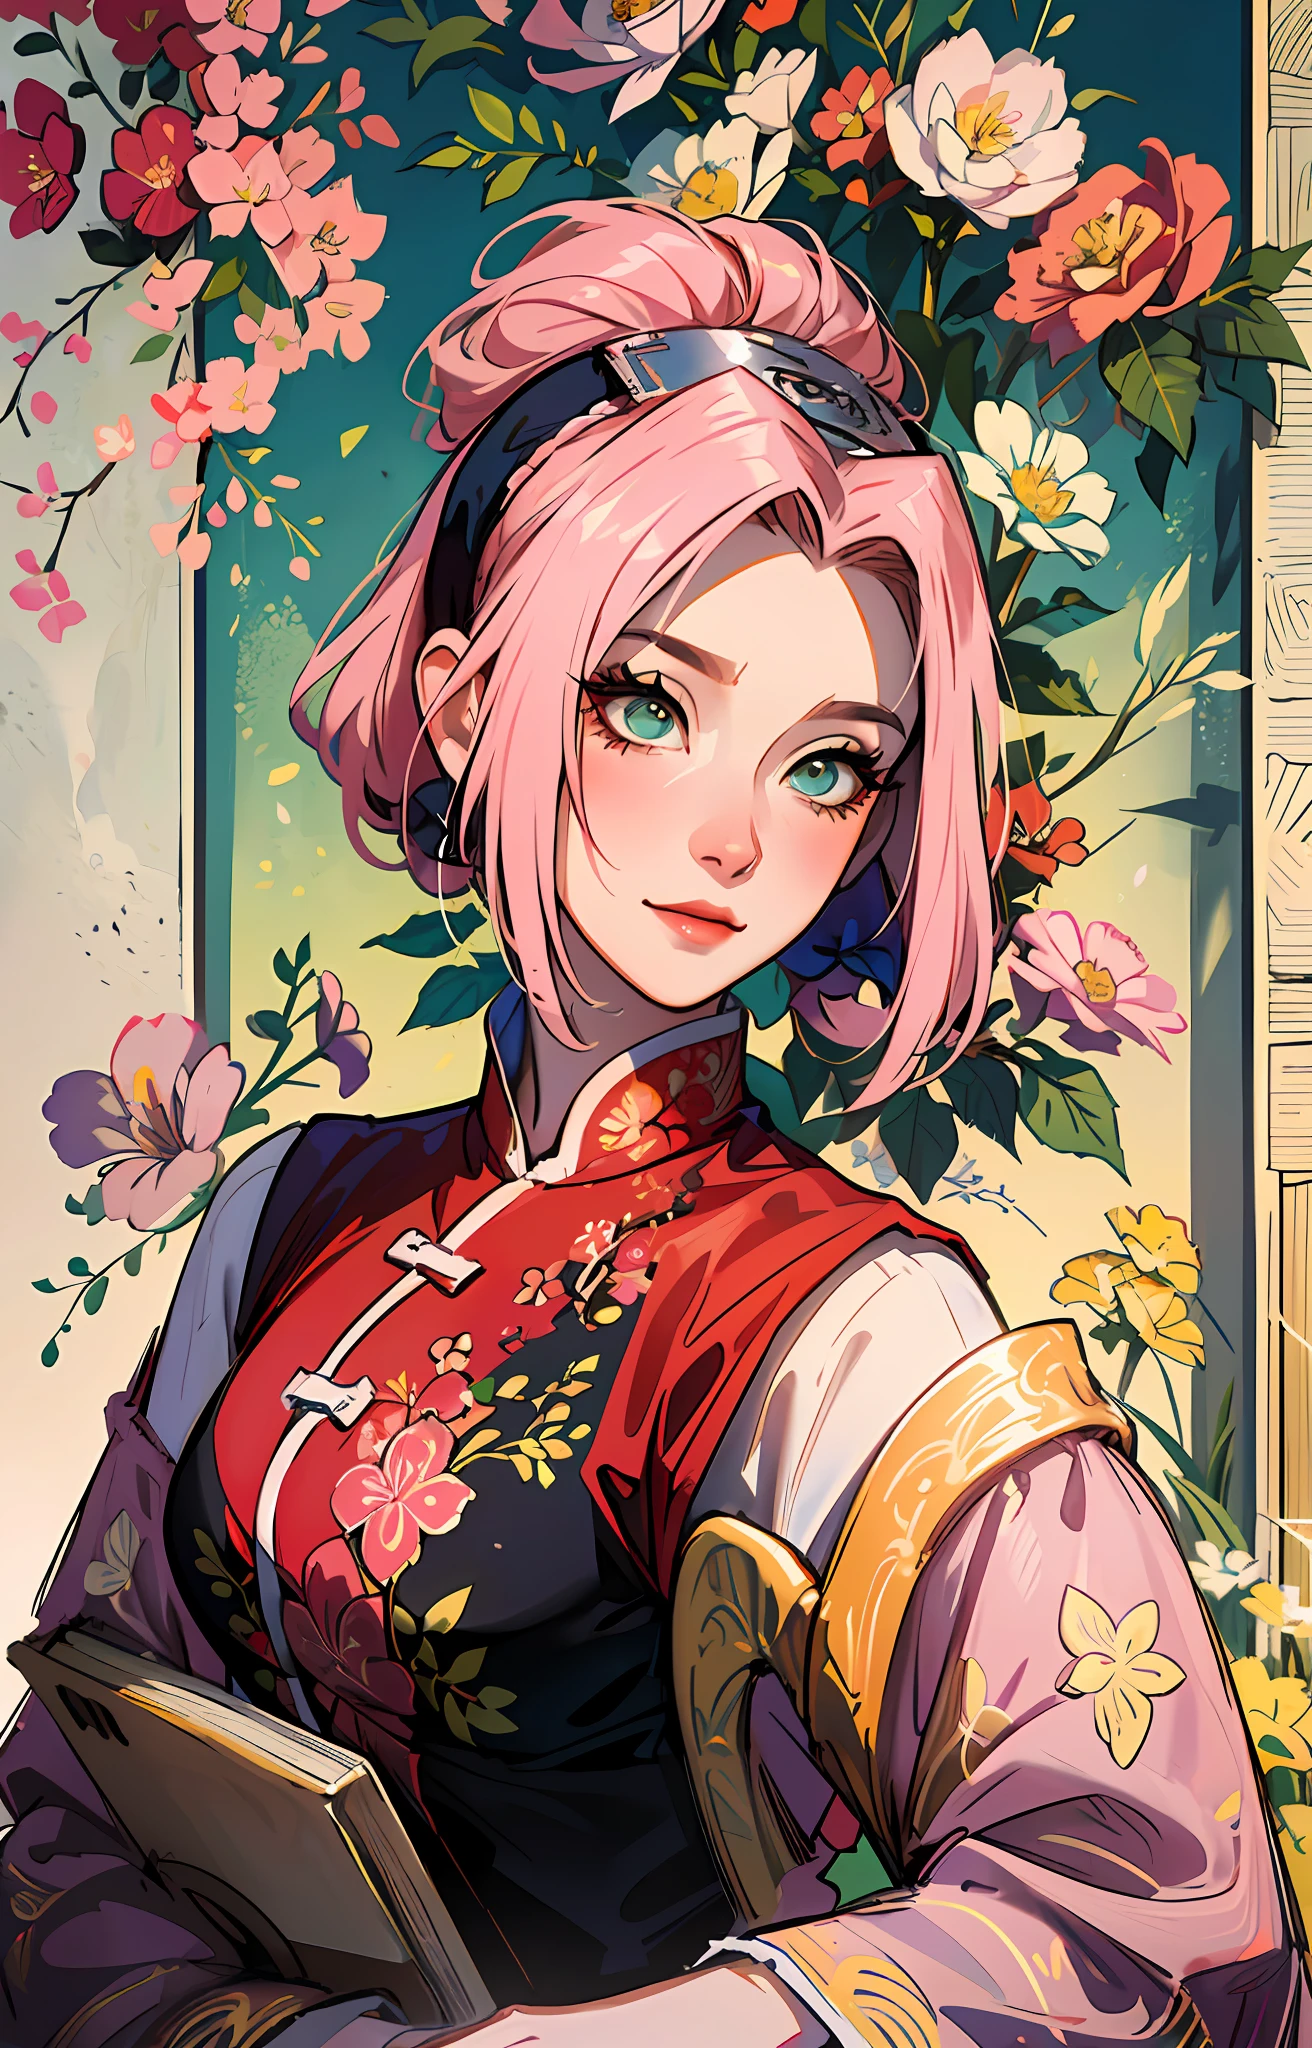 Masterpiece artwork, best qualityer, giorno, plein-air, festivals, celebrating, 1womanl, 独奏, mulher Madura, Madura, Chinese Style, ancient China, sister, royal sister, glad, Grinning, silver white long haired woman, gray blue eyes, handcuffed hair, bangss, pink peach flower on head, light pink lips, white outfit, pink  hair, fully body, slim, pretty, dainty